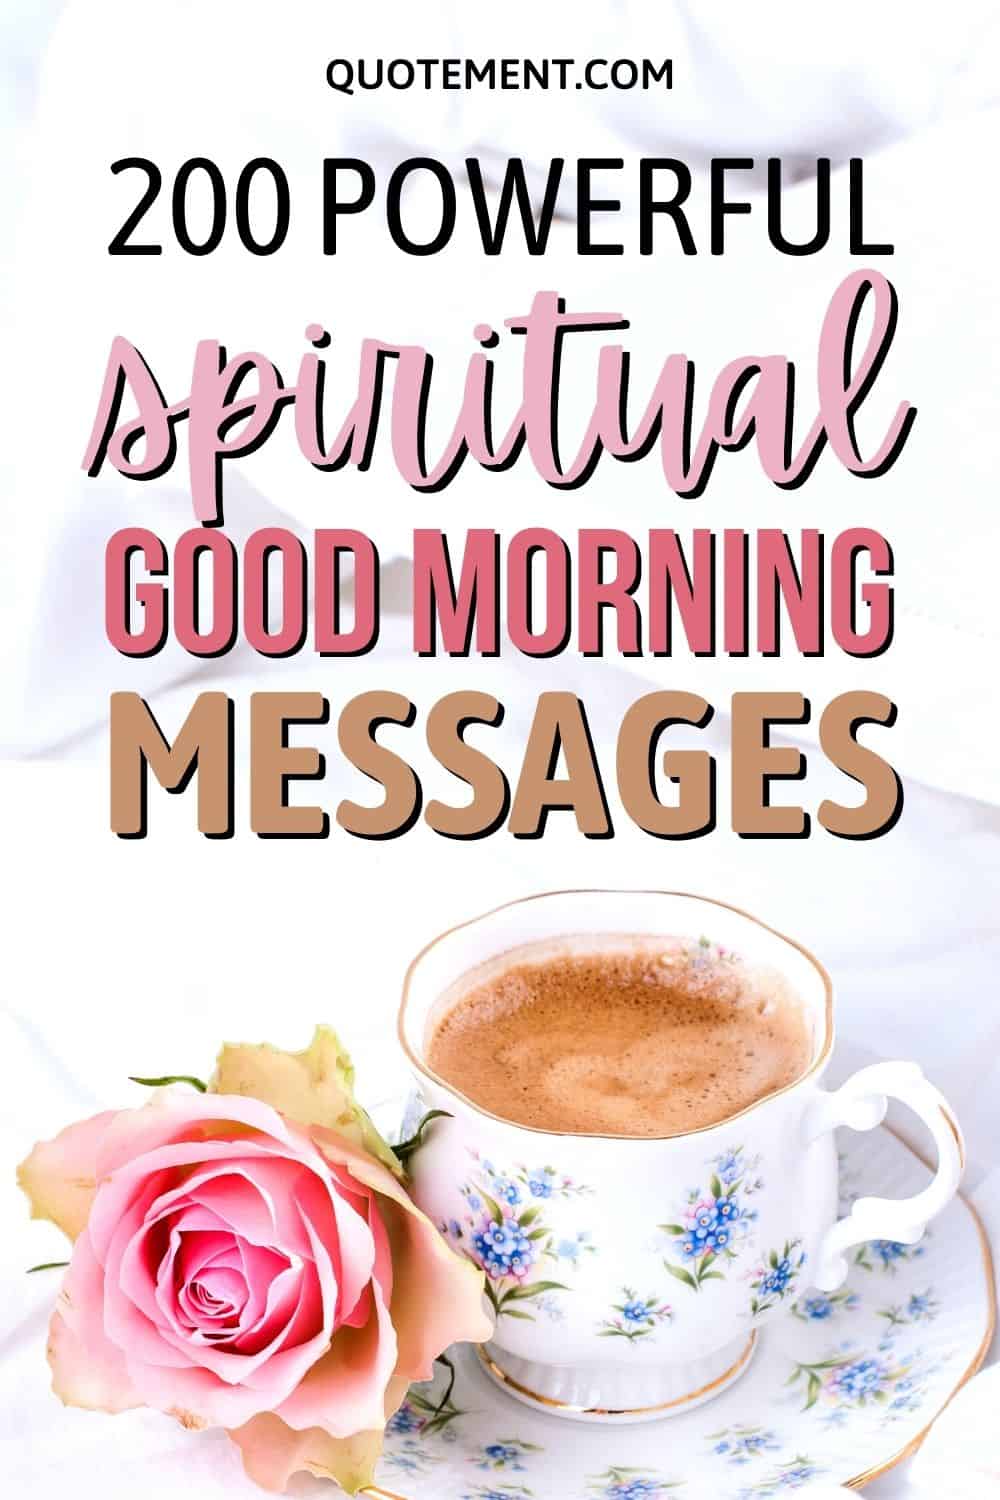 200 Powerful Spiritual Good Morning Messages & Quotes 